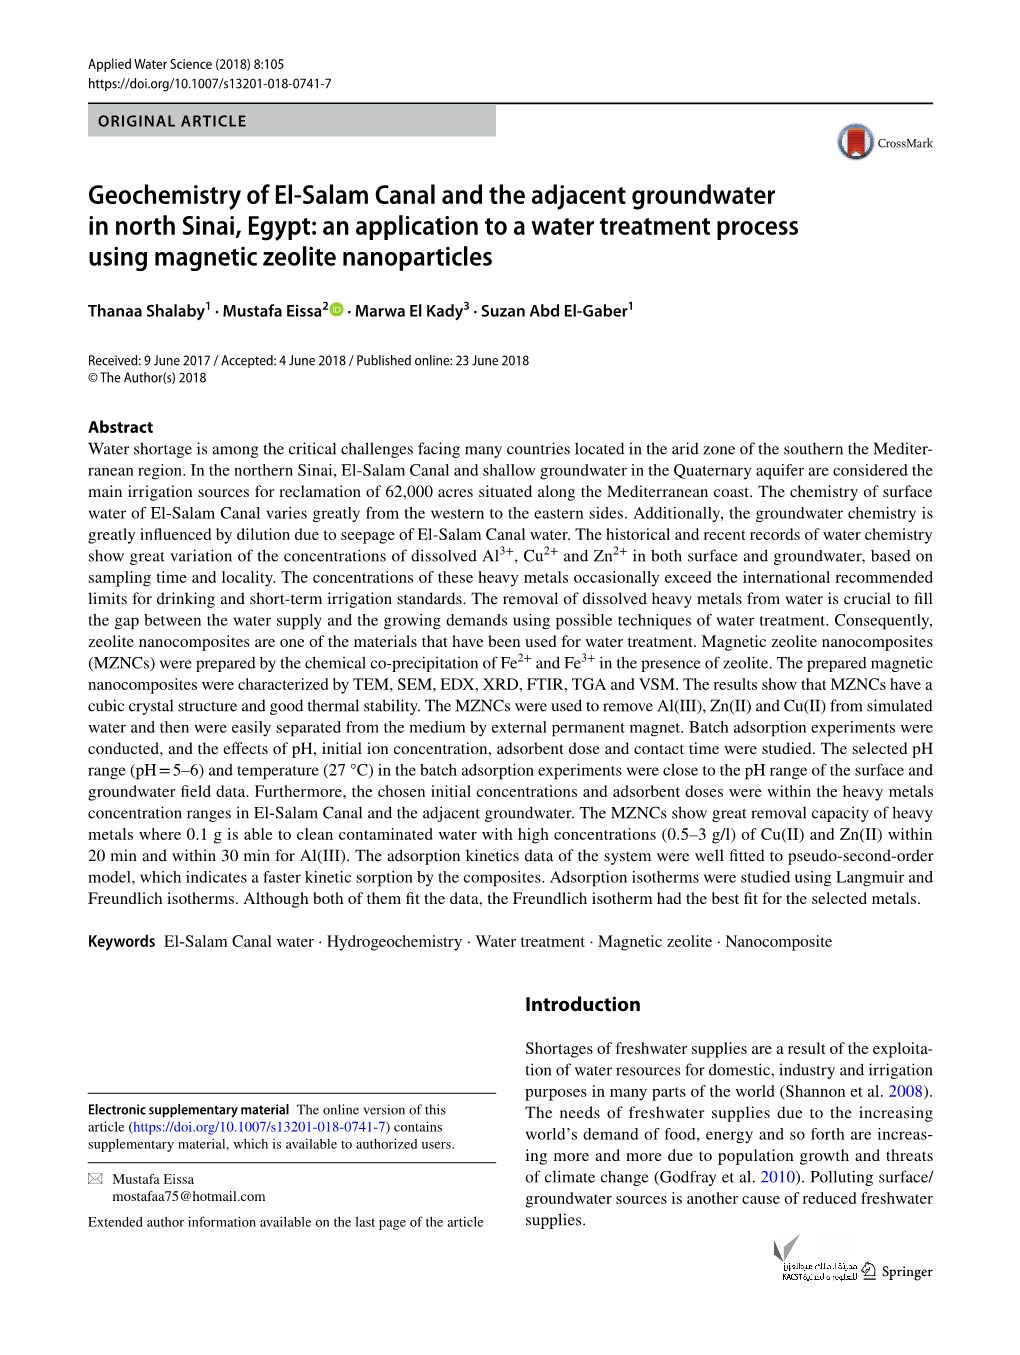 Geochemistry of El-Salam Canal and the Adjacent Groundwater in North